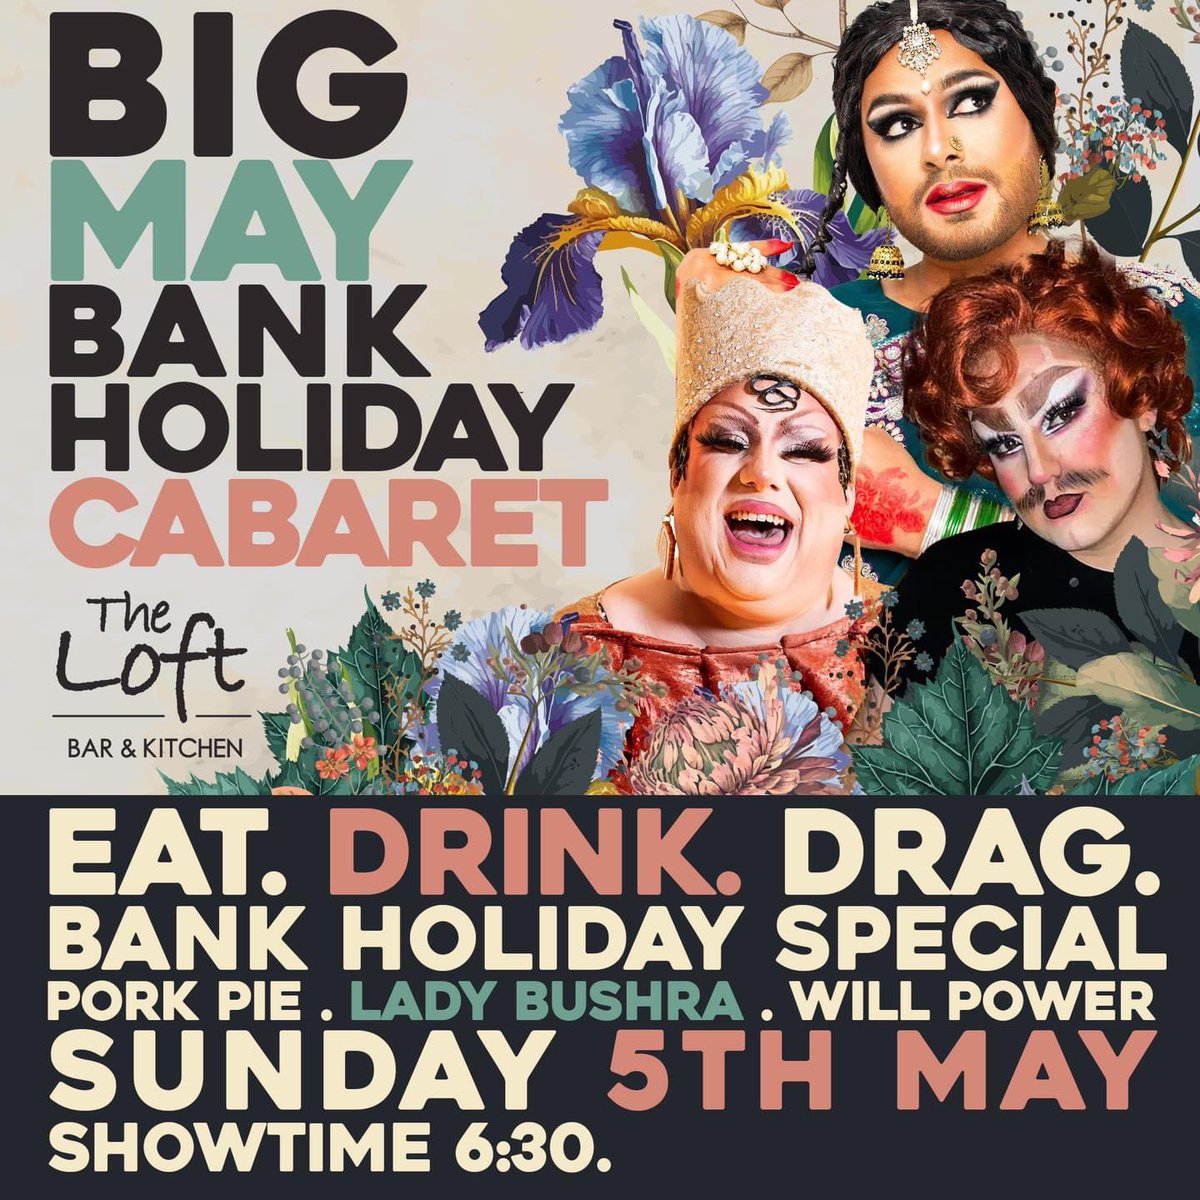 BIG BANK HOLIDAY SPECIAL 👠 💄 @TheLoftBrum BANK HOLIDAY CABARET SPECIAL is fast approaching! Arrive early this Sunday, 5th May for our infamous Bank Holiday weekend with THREE icons, @ladybushraOG @PorkElizabeth and Will Power LIVE from 6pm! 🍹PLUS TWO COCKTAILS FOR £12